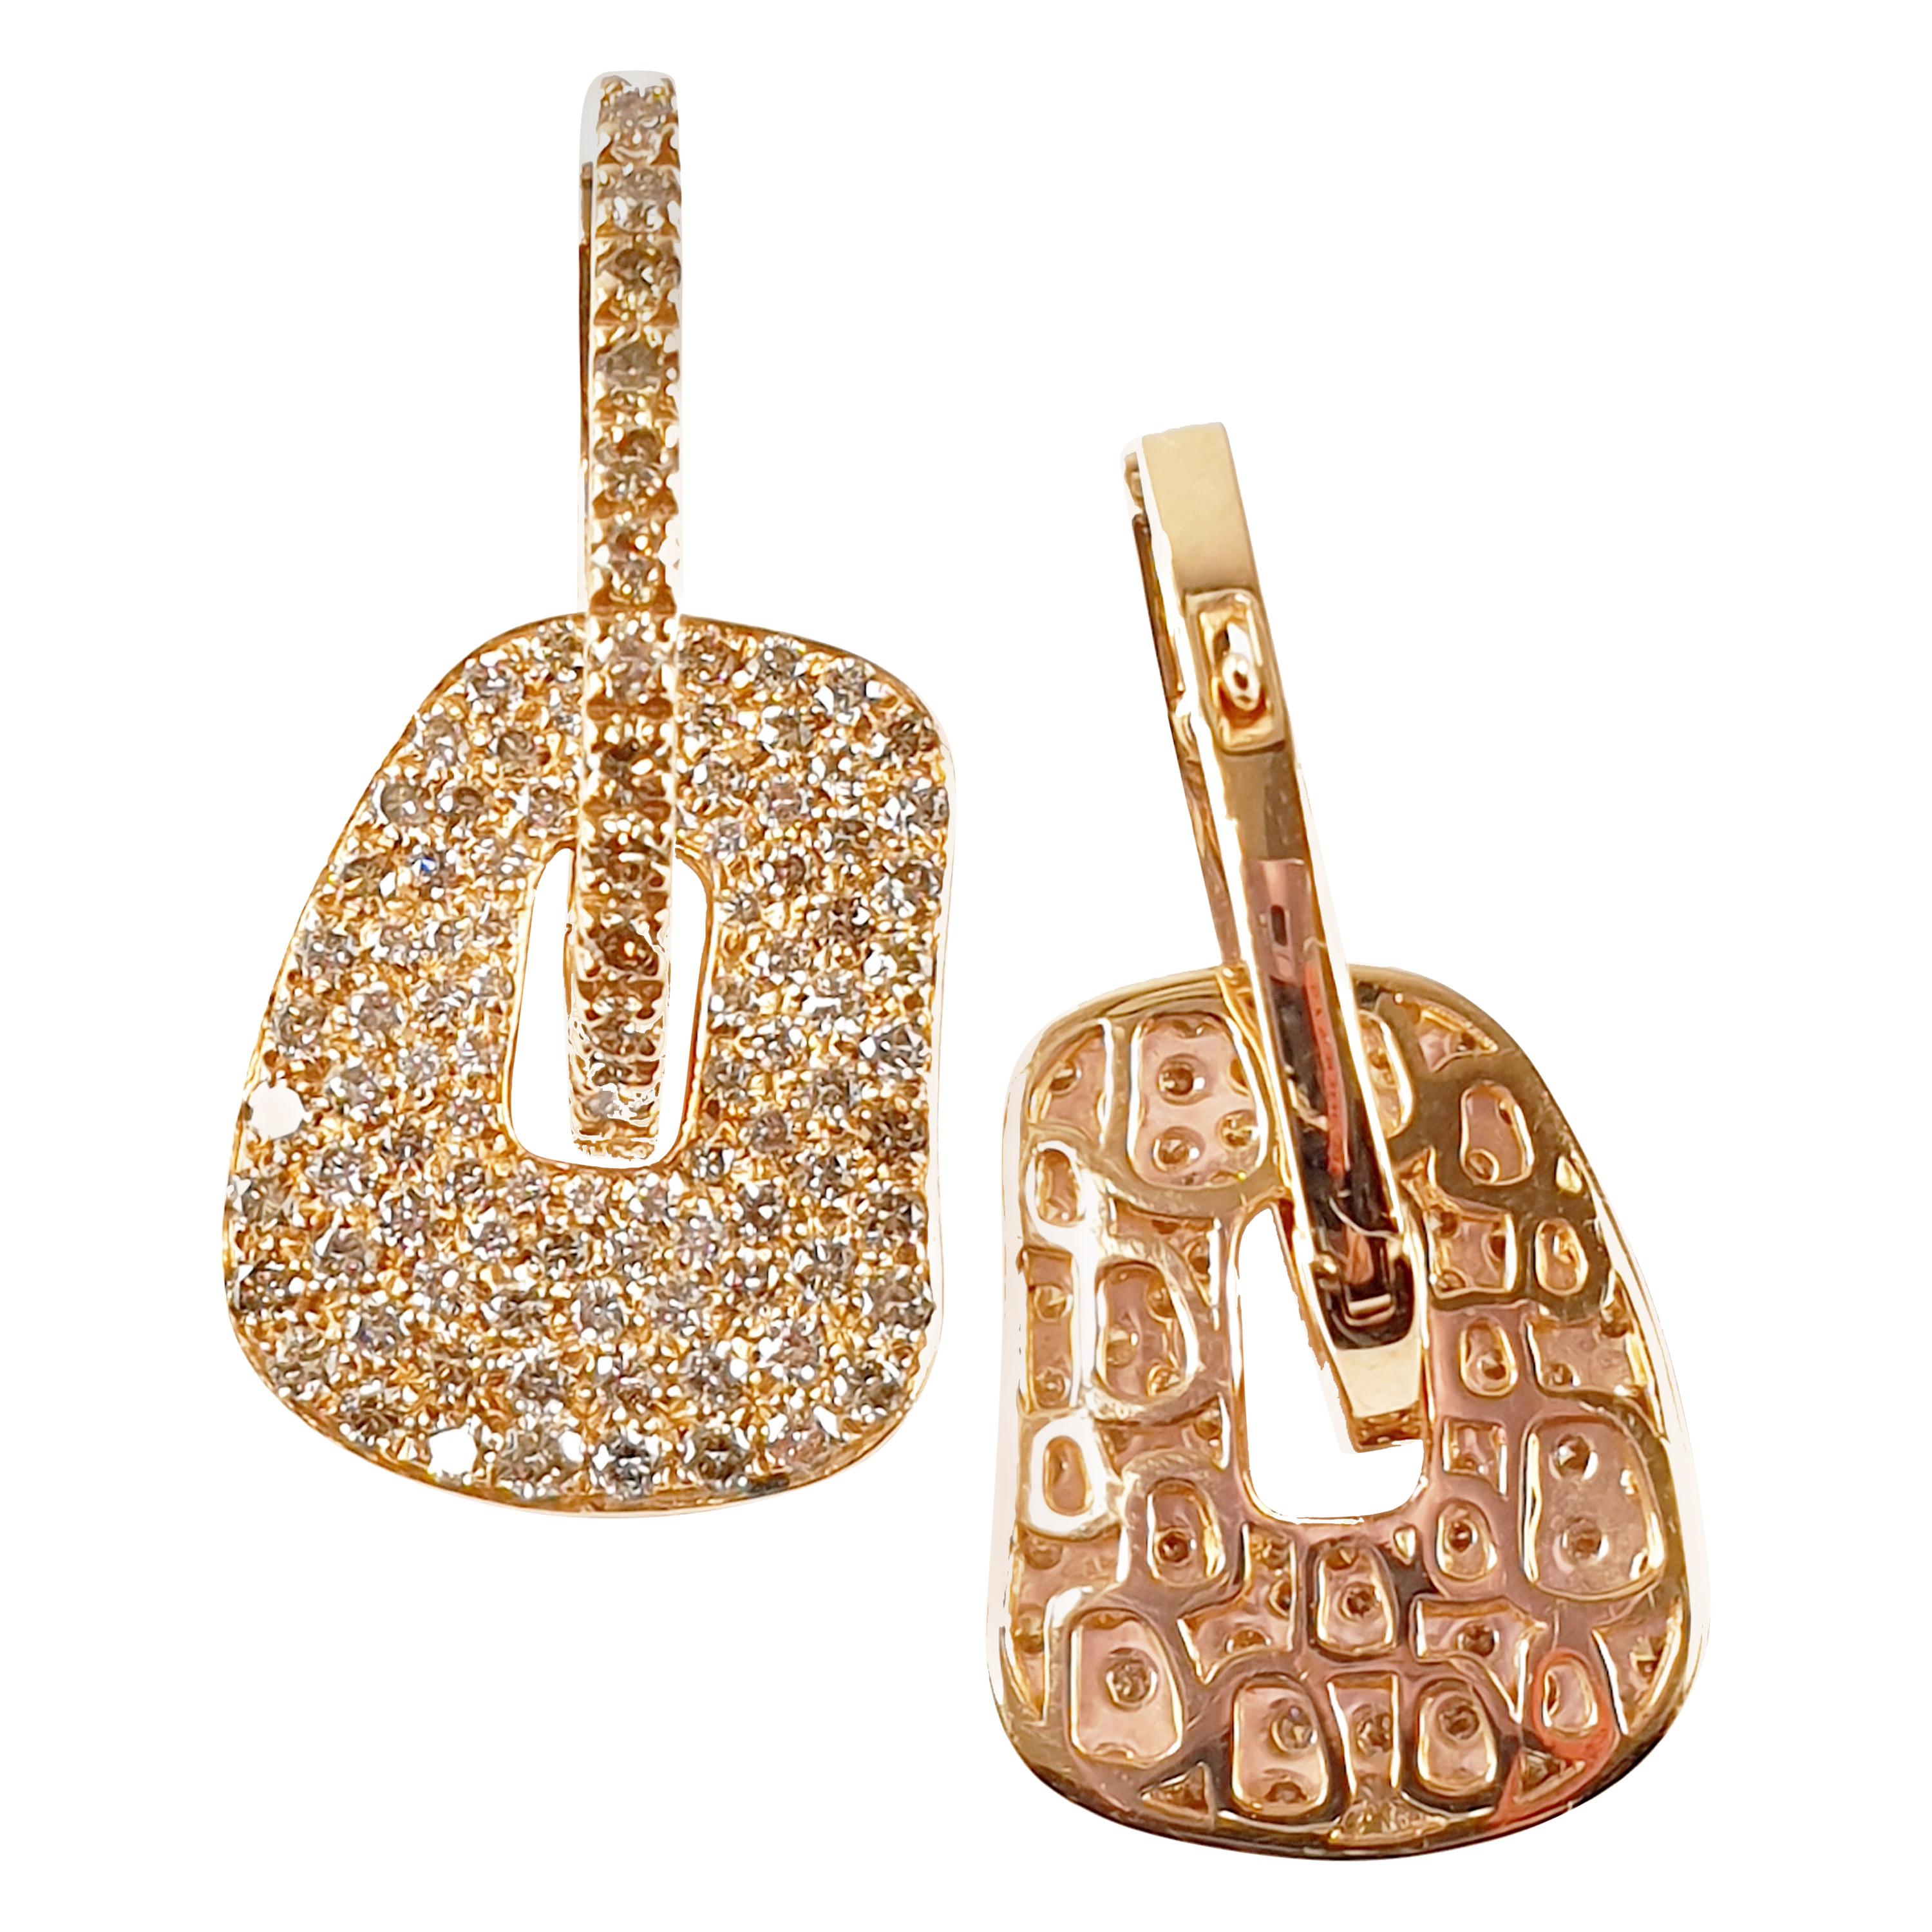 Mattioli Puzzle Collection 18 Karat Rose Gold and Brown Diamonds S Size Earrings